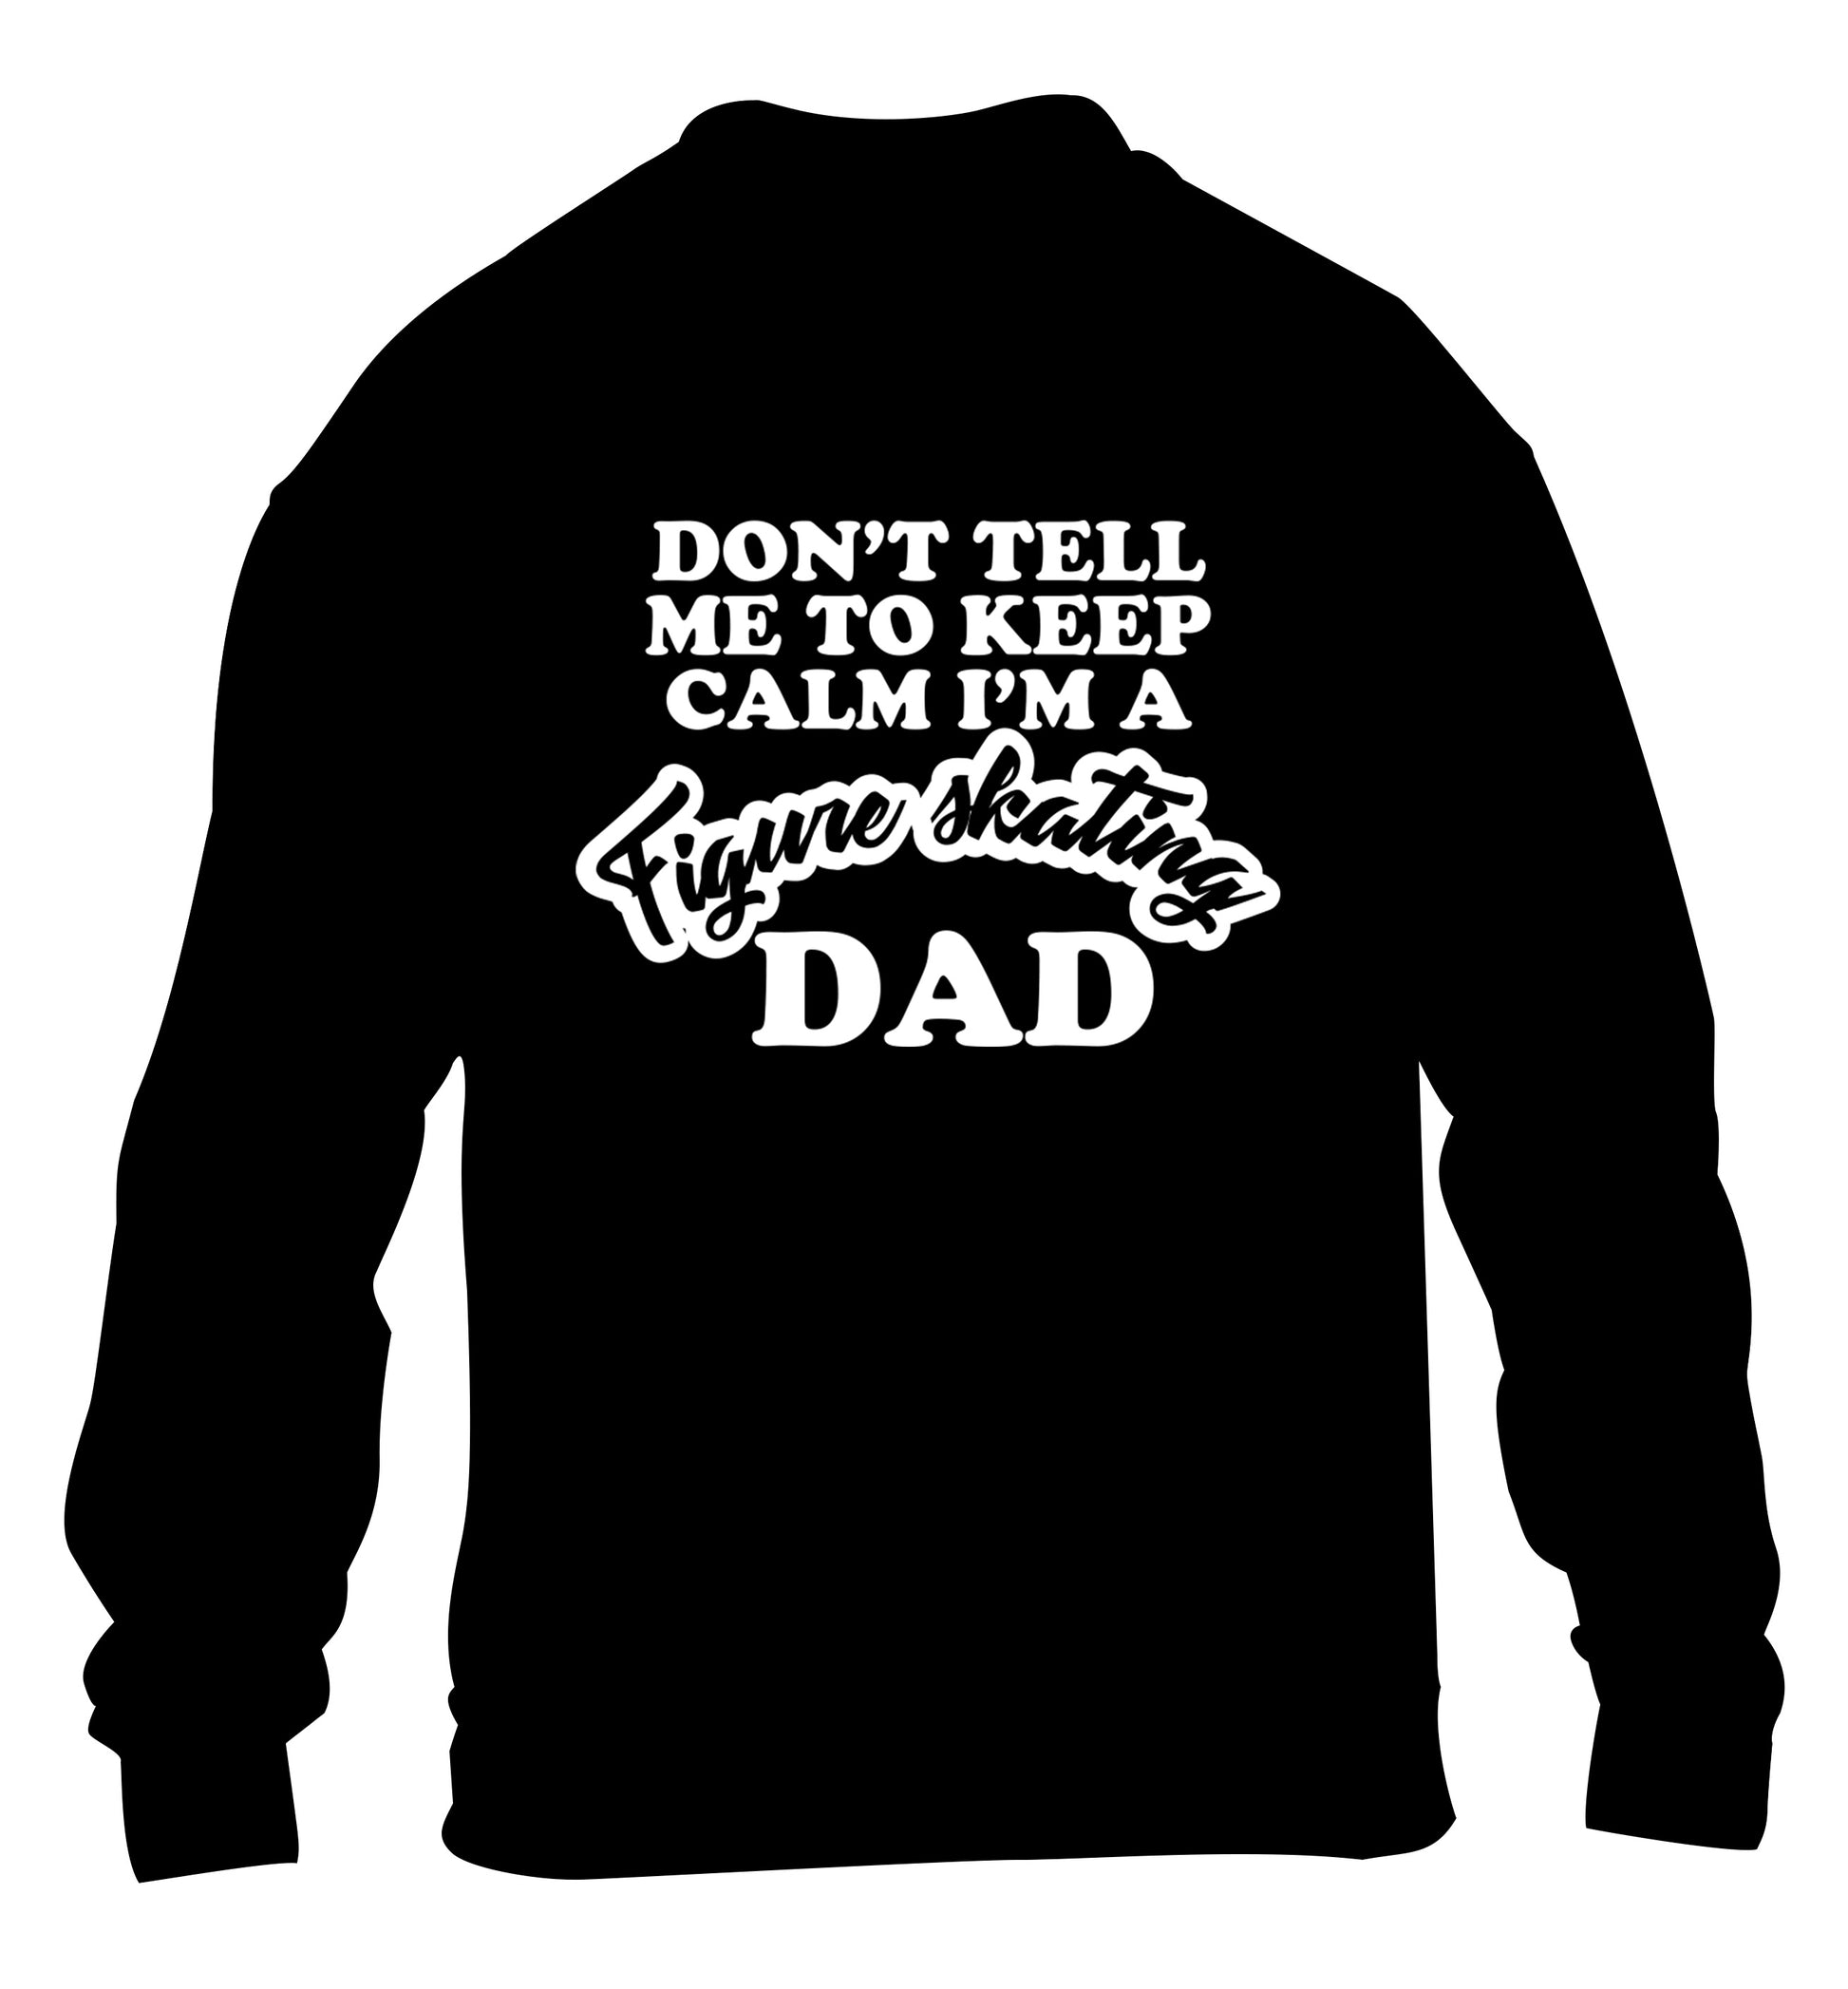 Don't tell me to keep calm I'm a figure skating dad children's black sweater 12-14 Years